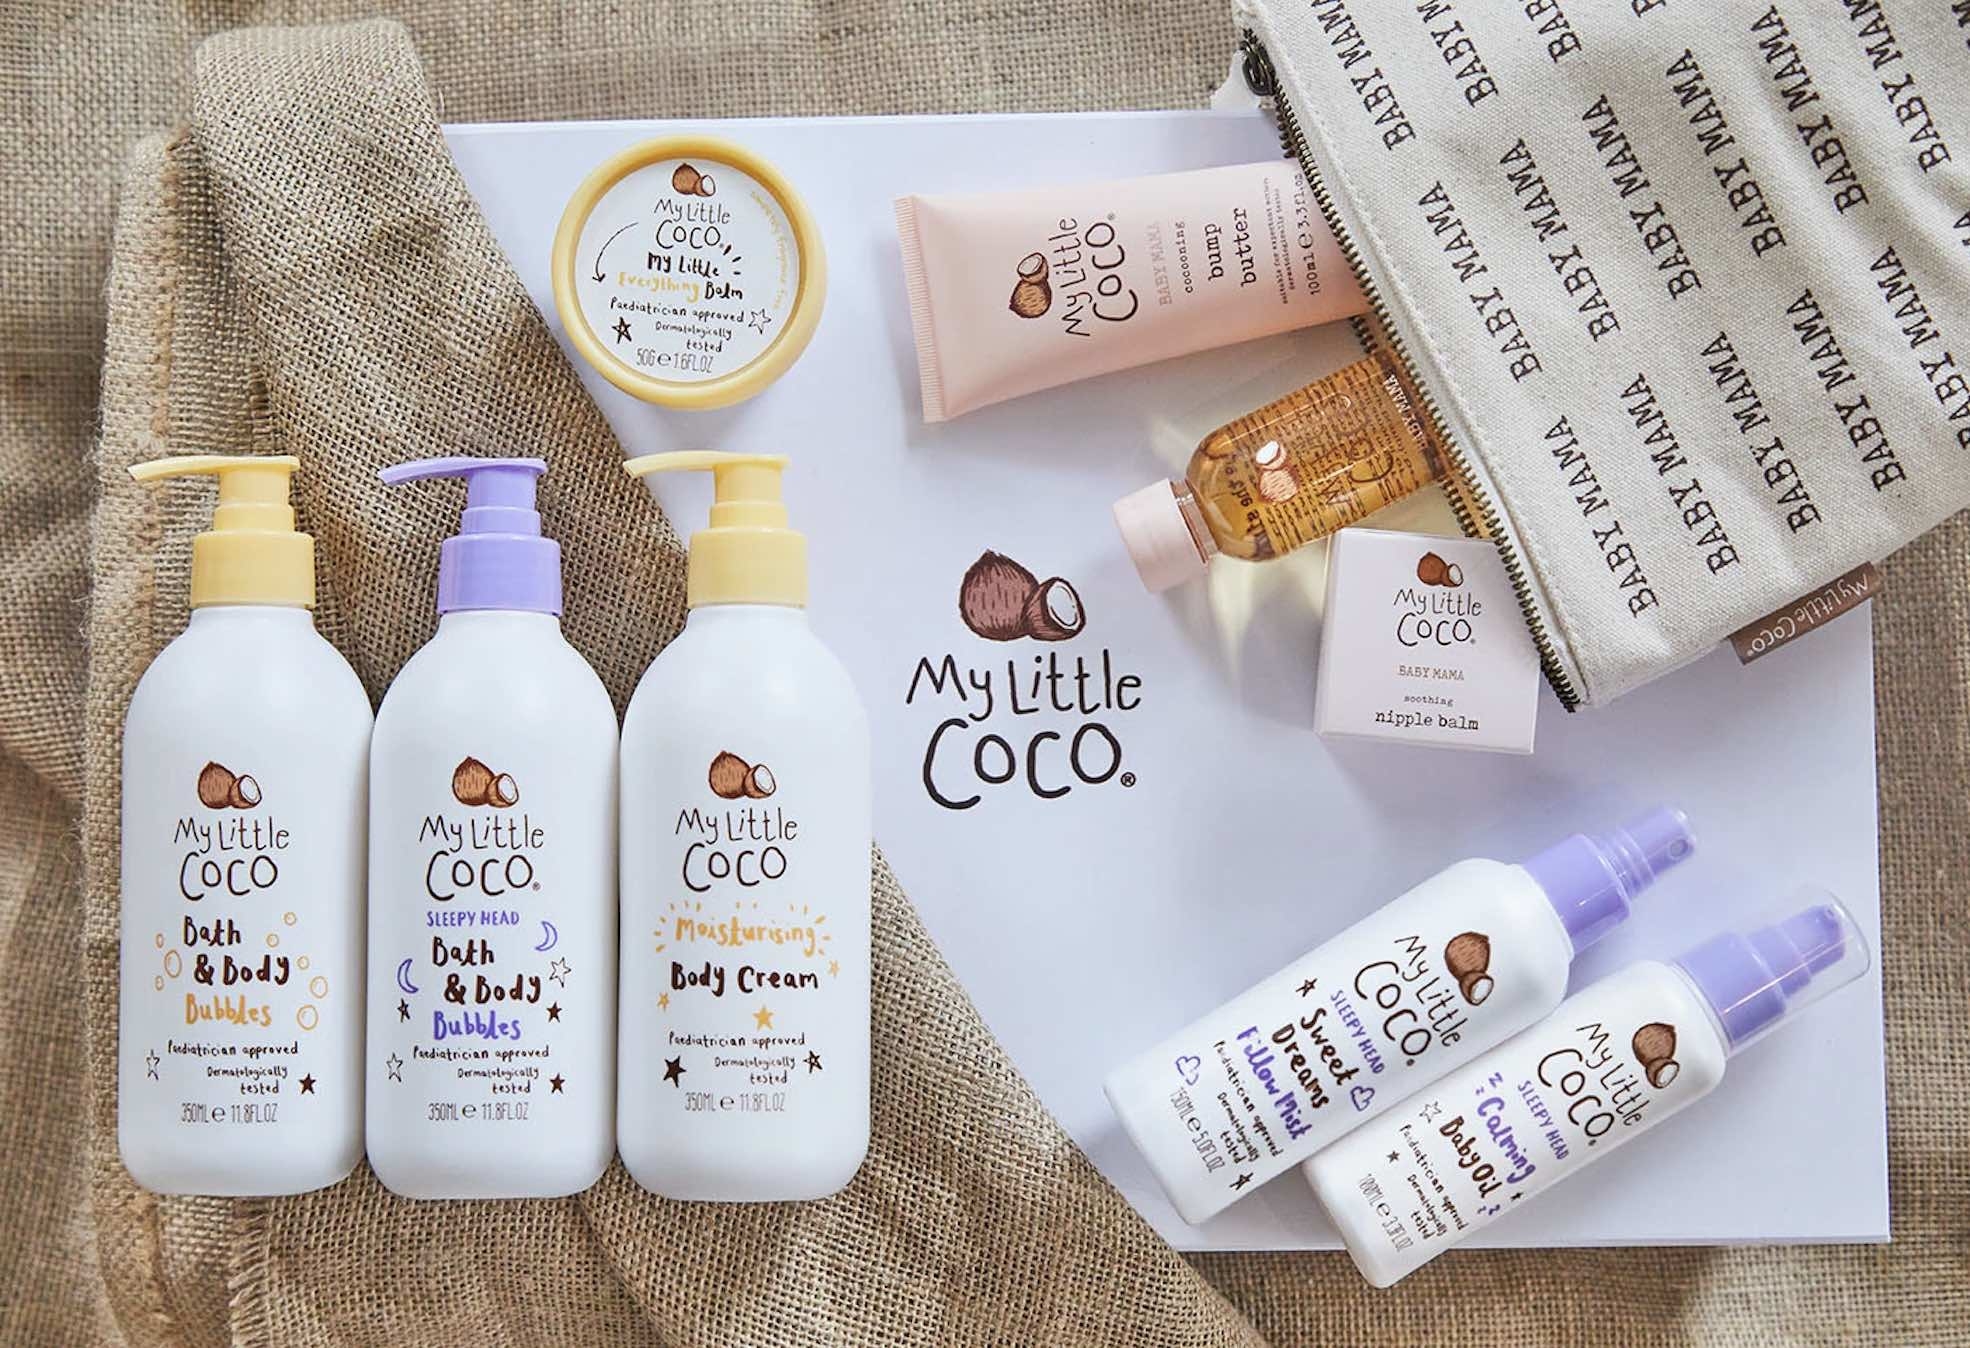 A selection of products from the My Little Coco range